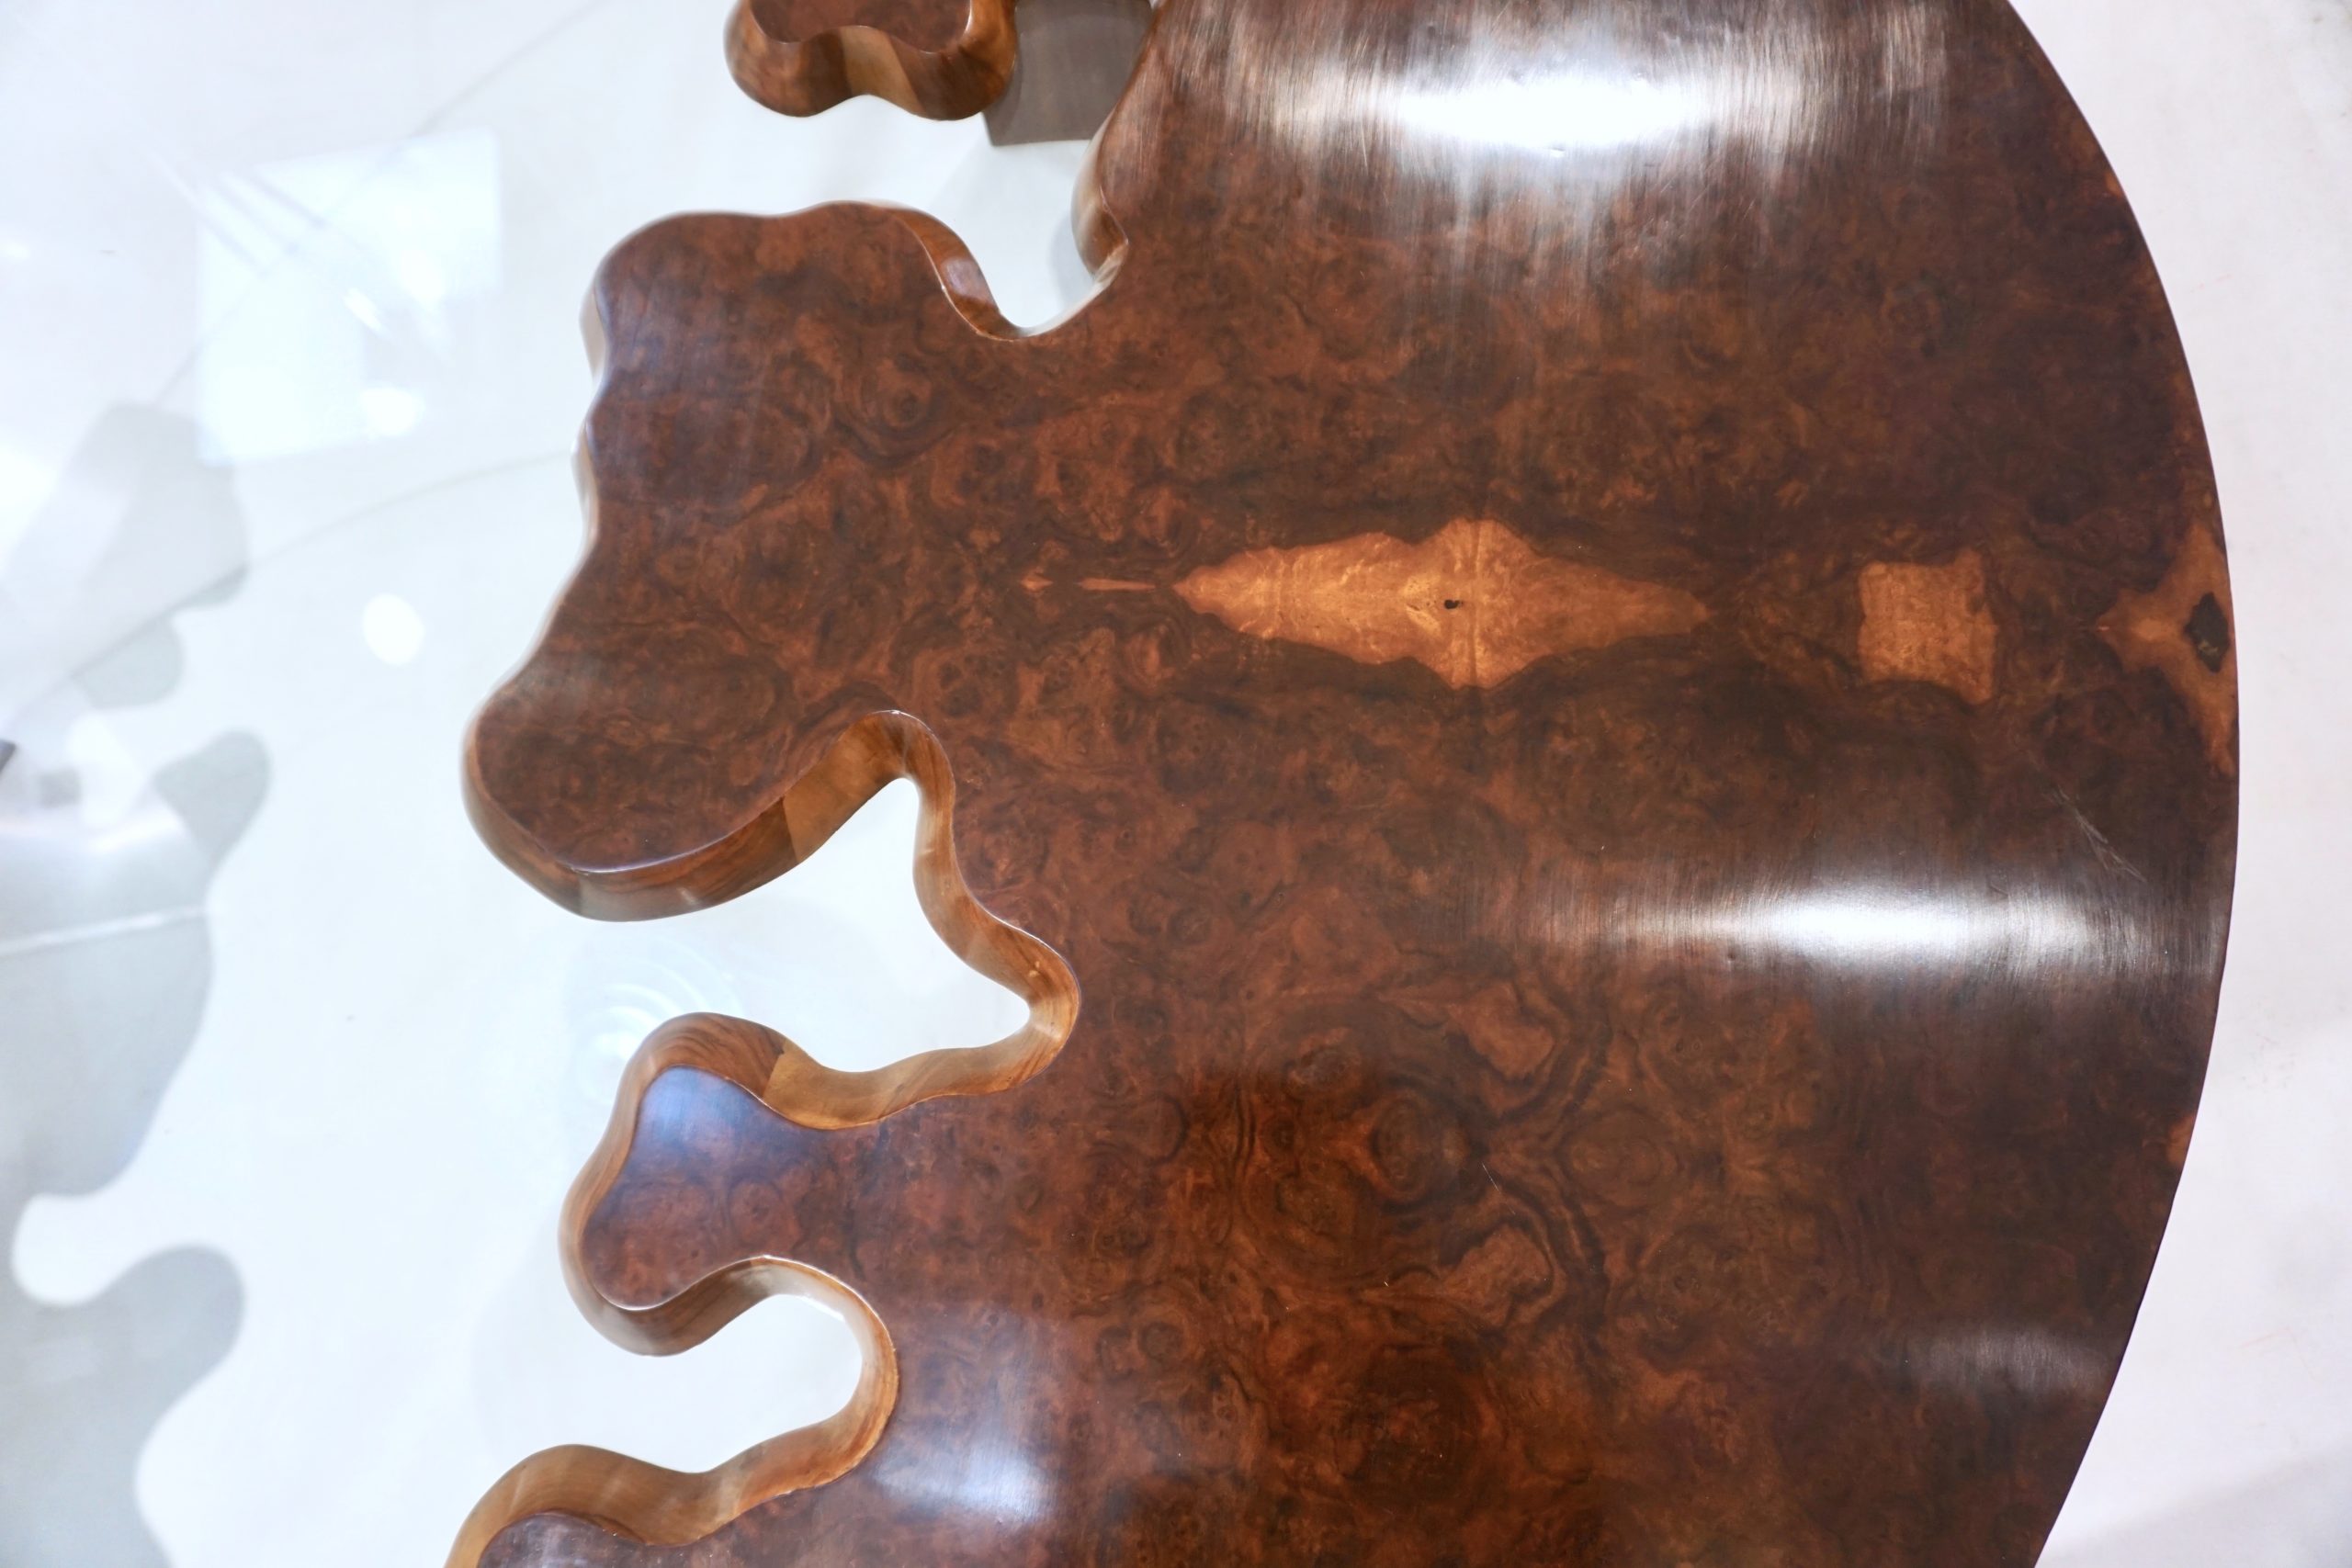 cosulich_interiors_and_antiques_products_new_york_design_Bespoke_1980_Italian_Organic_Walnut_Veneer_Glass_Oval_Coffee_Table_detail-scaled-1